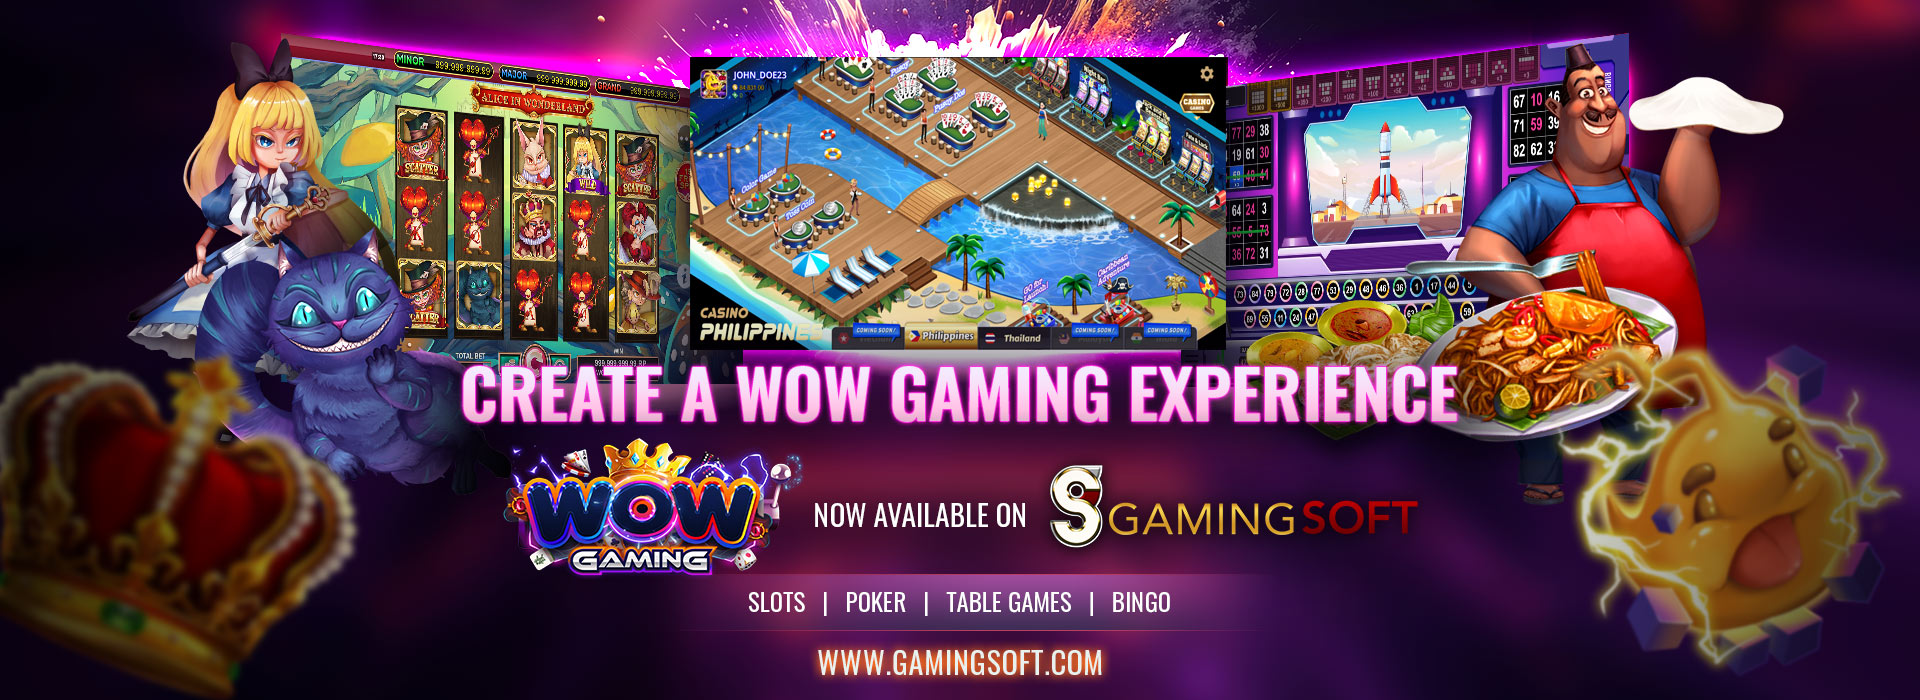 Create a WOW Gaming Experience Web Banner - GamingSoftWeb 